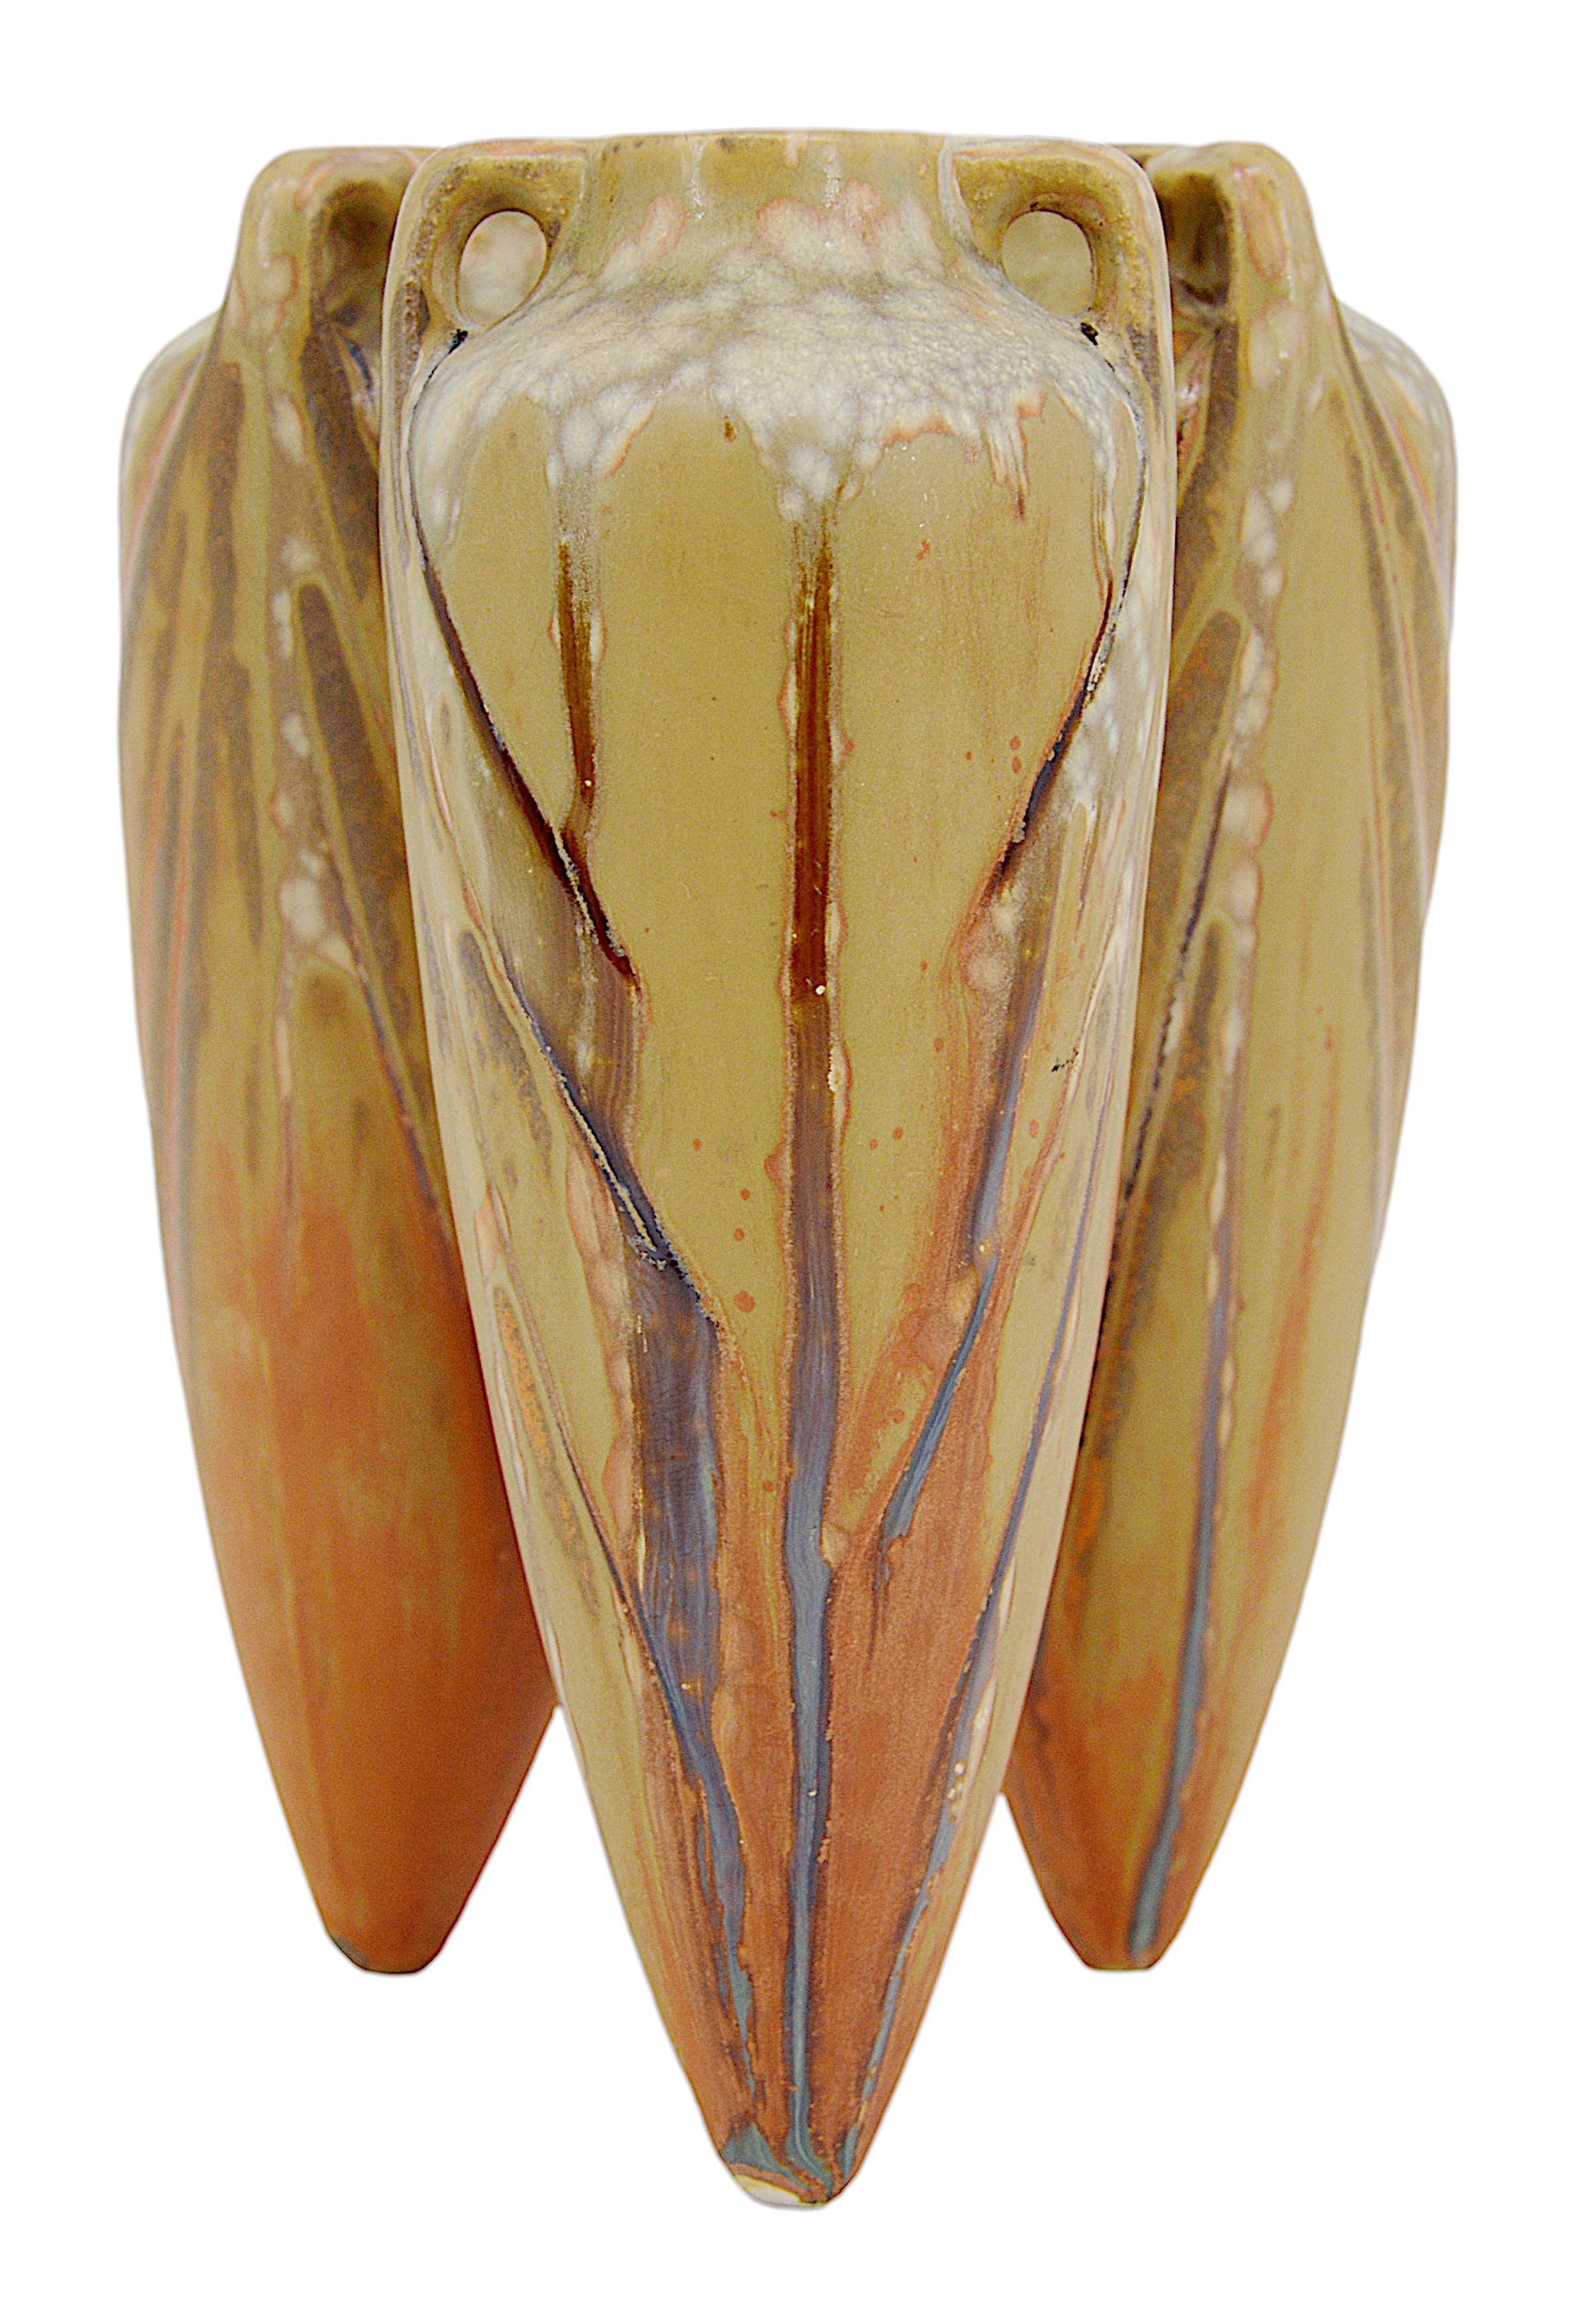 French Art Deco stoneware vase by DENERT & BALICHON (Vierzon), France, ca.1920. Tri-vase in stoneware for small cut flowers. Height : 6.3